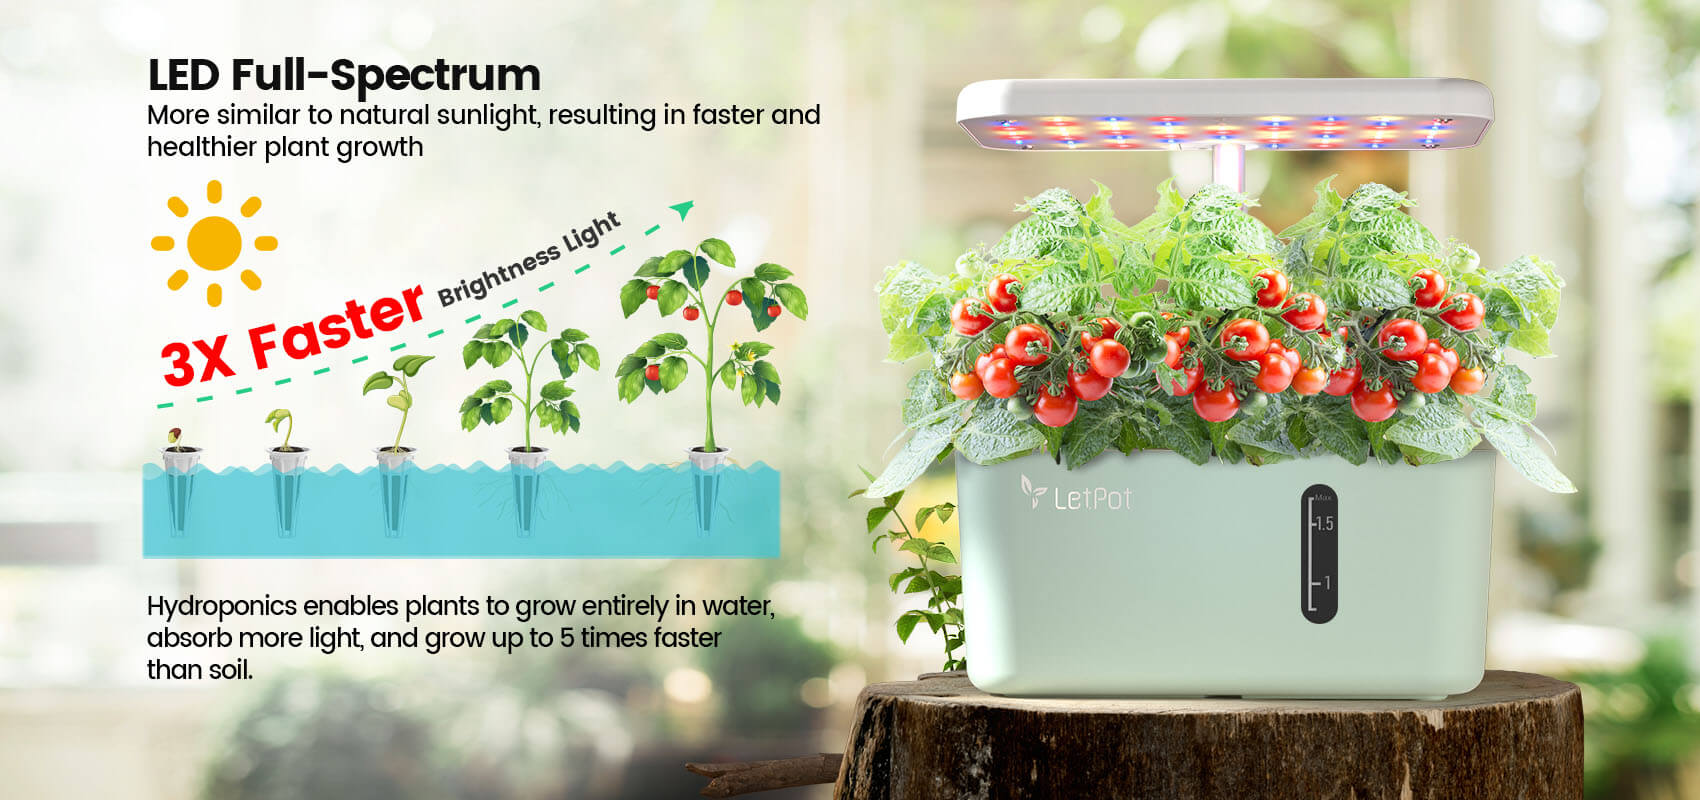 LED Full-Spectrum Hydroponic Grow Light - 3X Faster Brightness for Healthier Plant Growth, 5X Faster than Soil